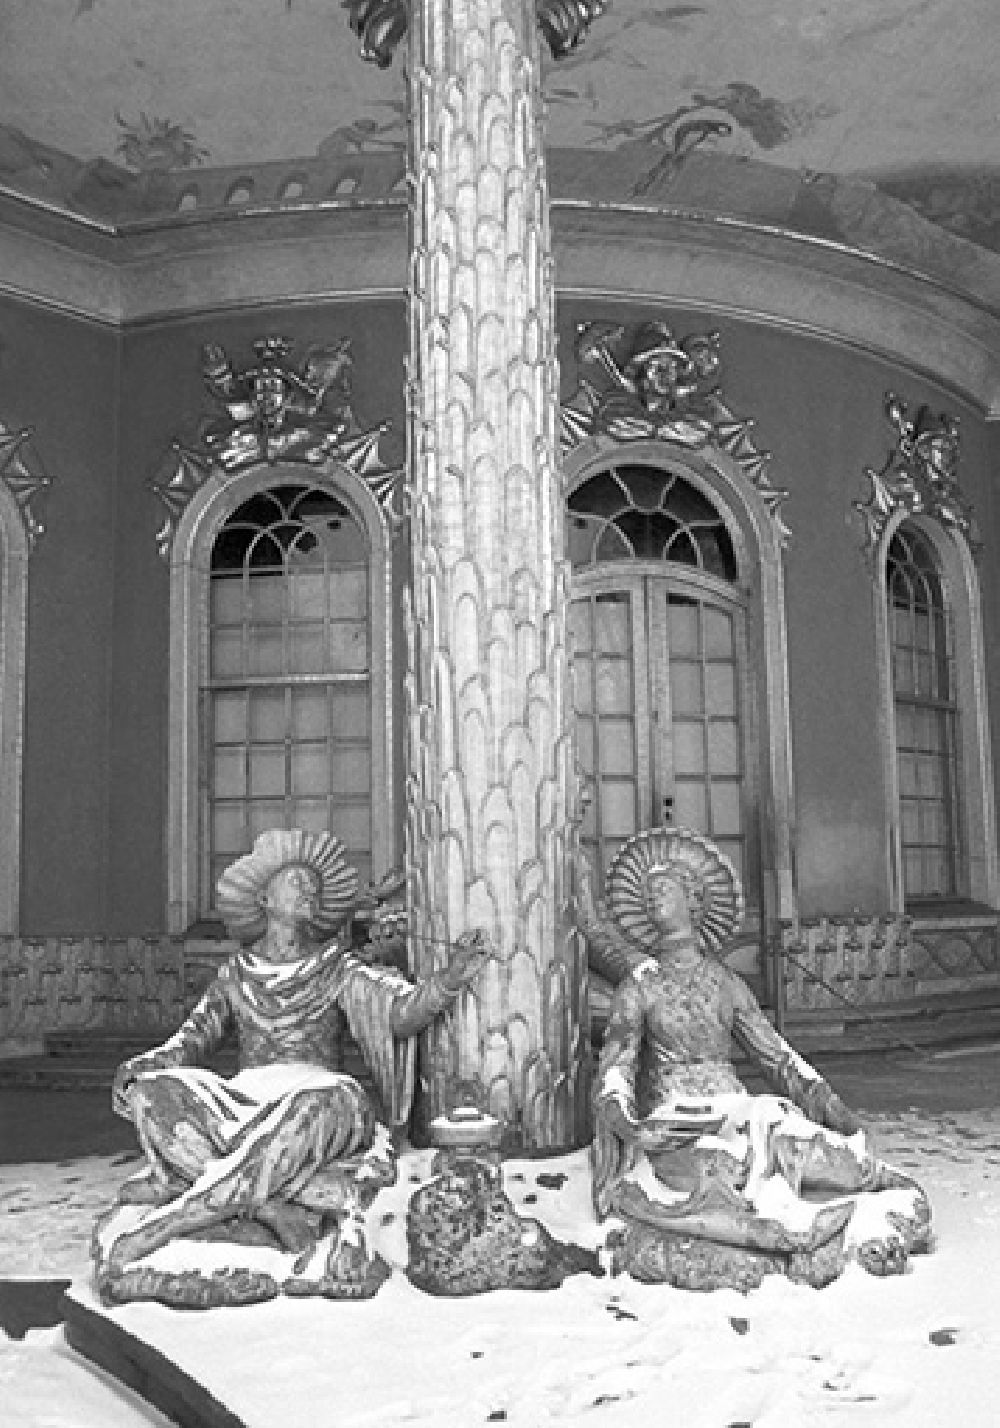 GDR image archive: Potsdam - Group of figures at the Chinese Tea House in Sanssouci Park in Potsdam